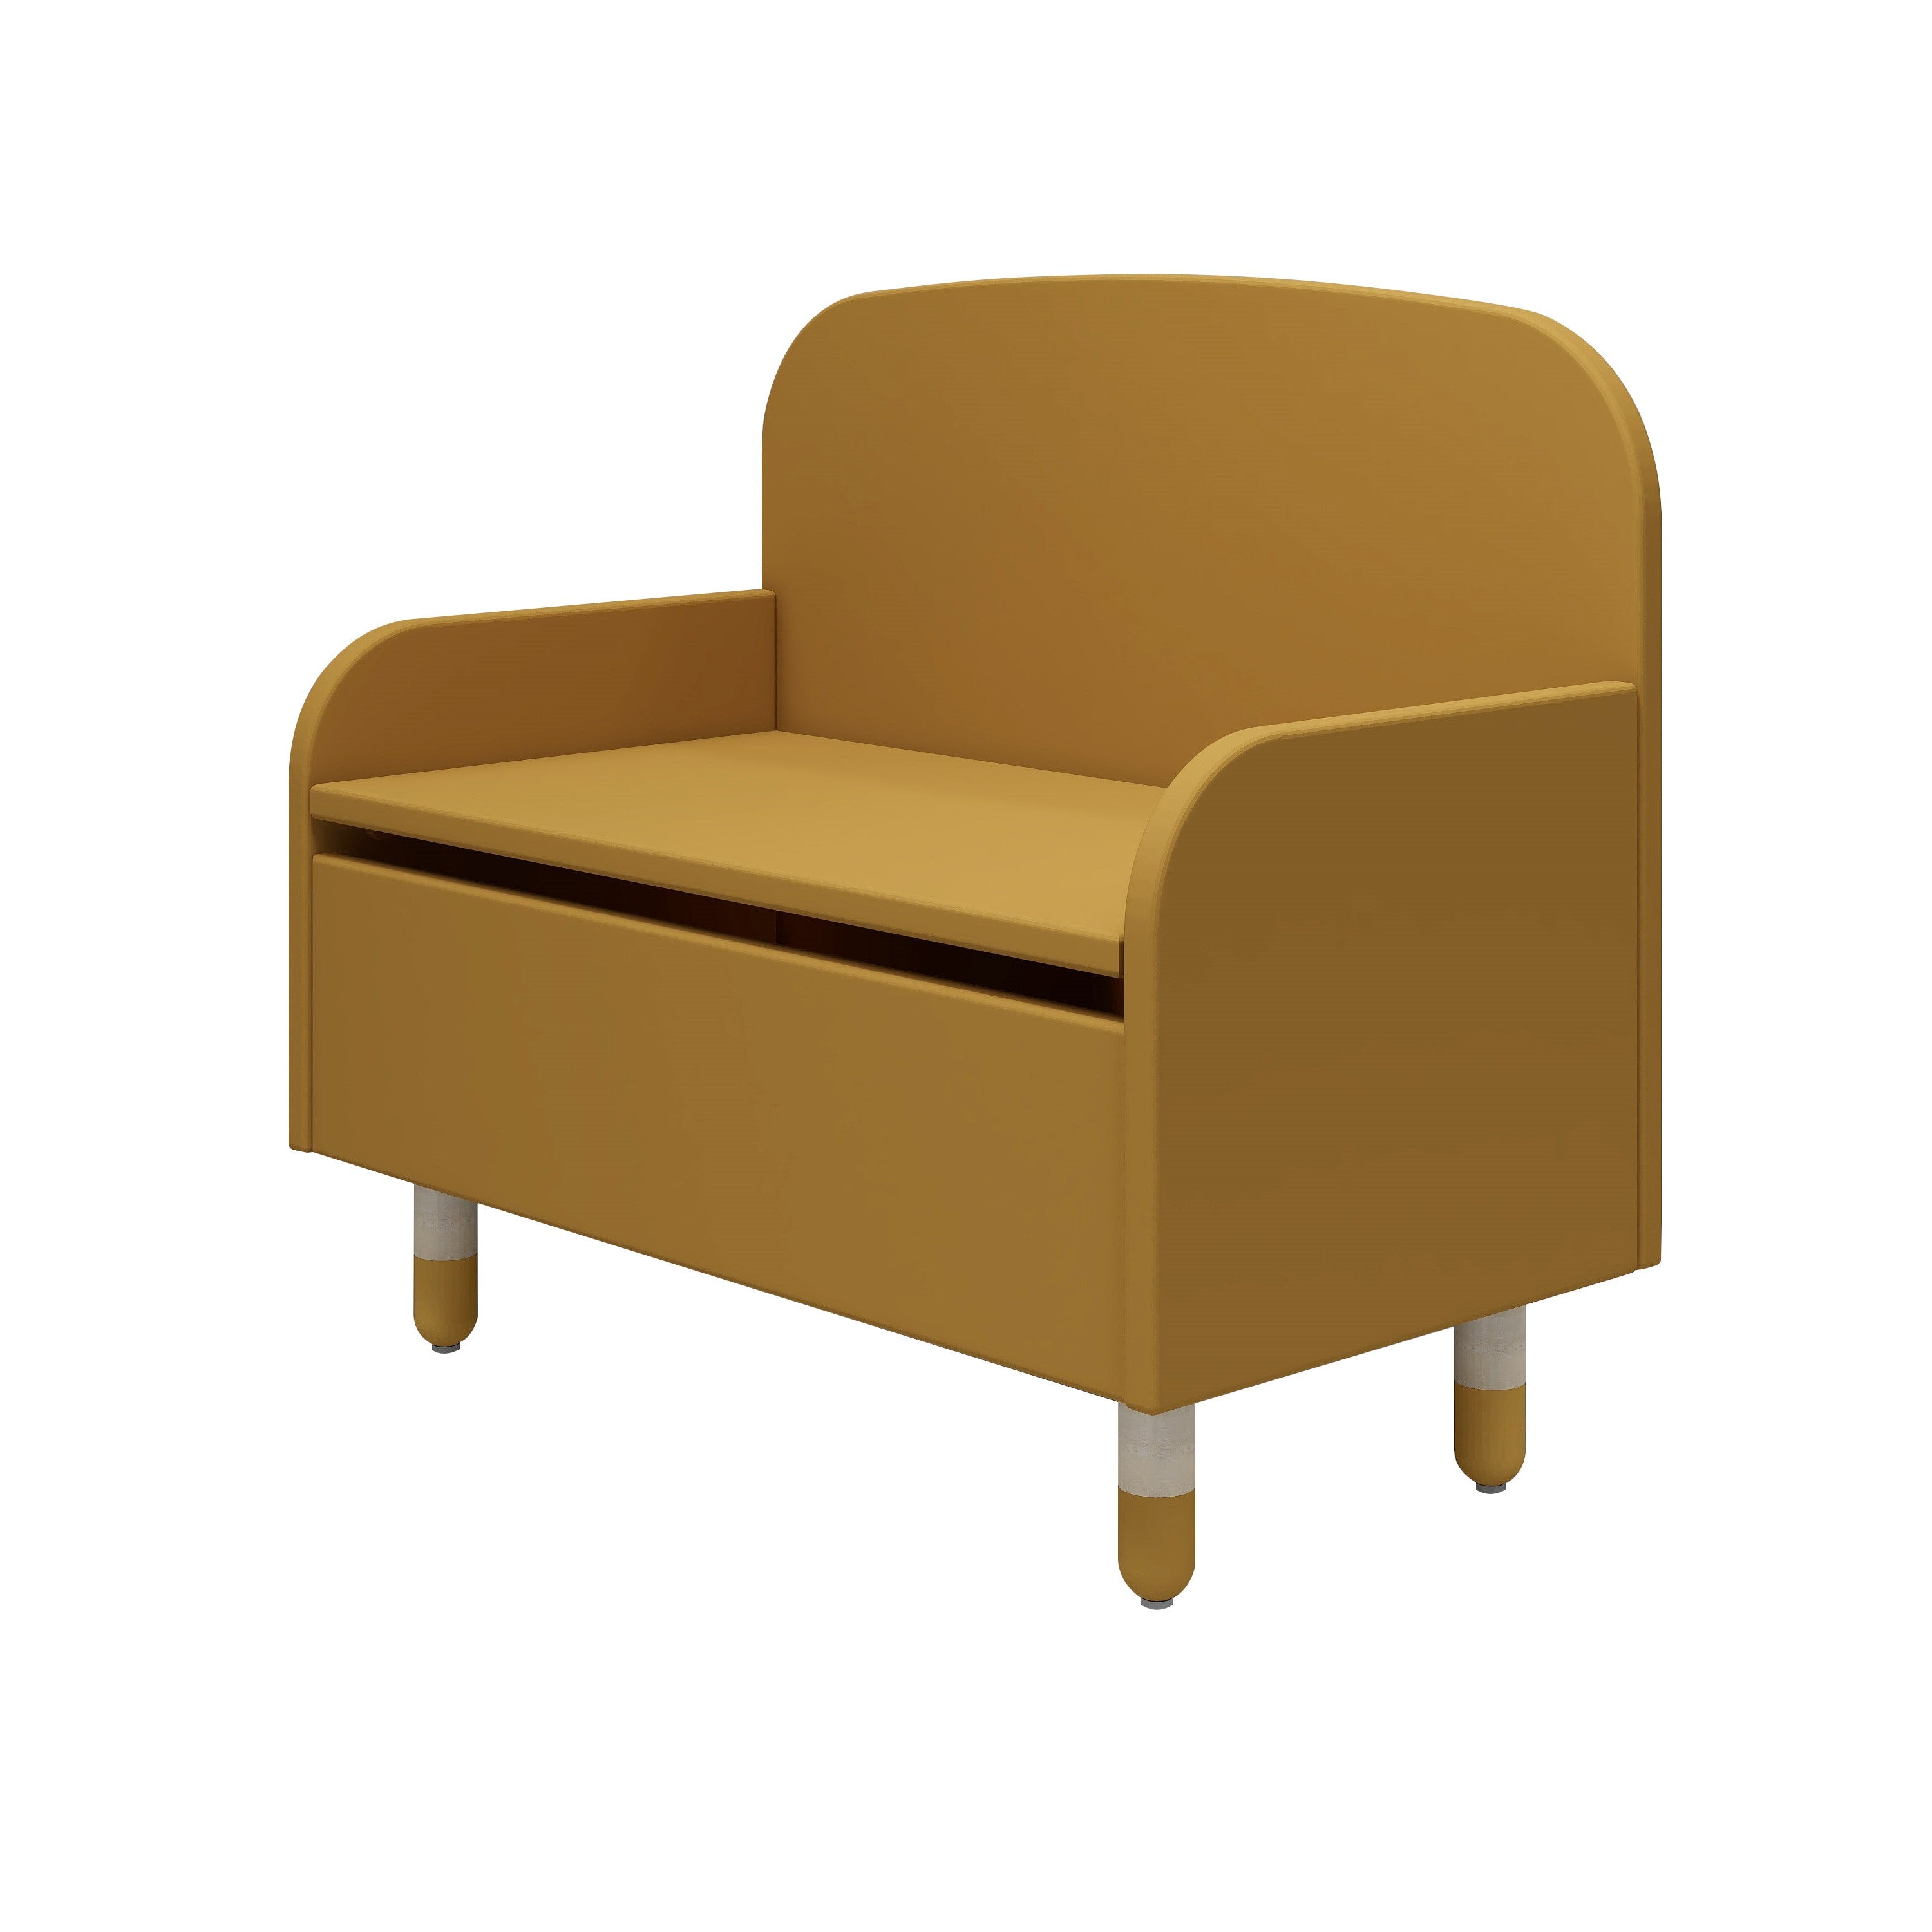 Flexa Dots Storage Bench with Back Rest in Mustard